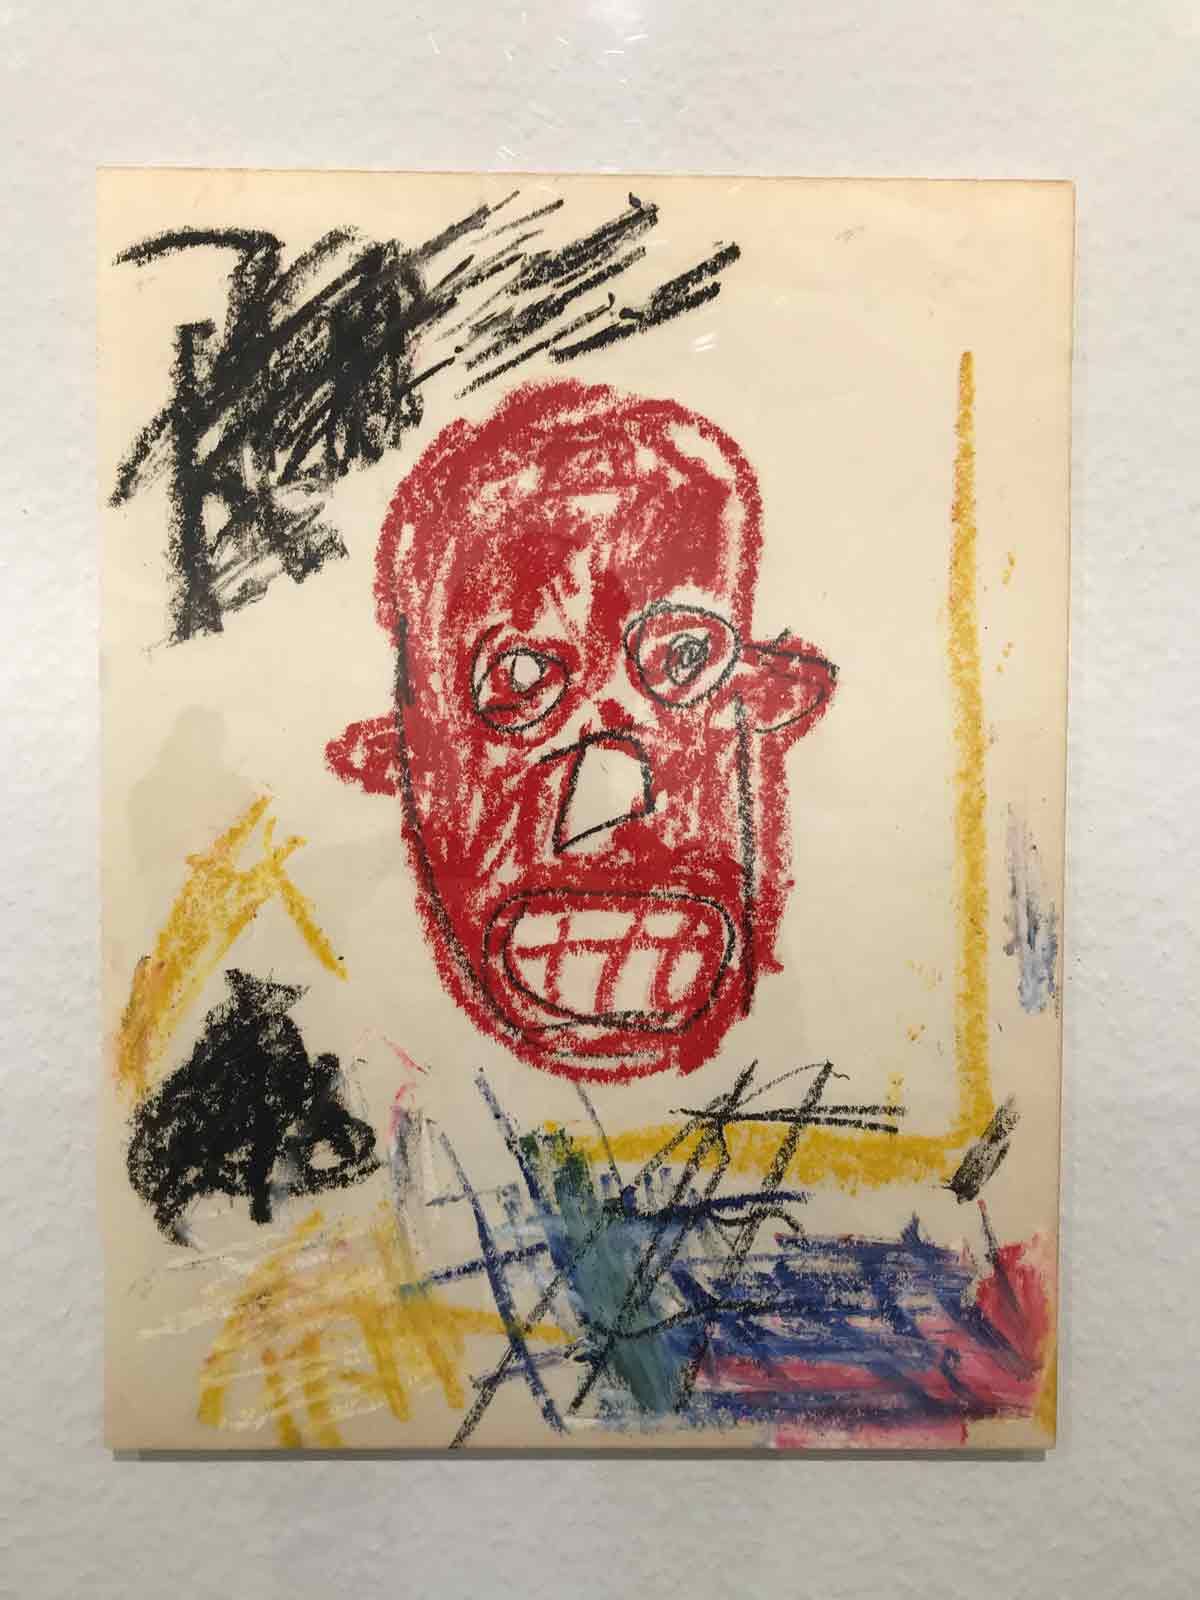 One of the sketches made by Basquiat between 1979 and 1981 Gareth Harris